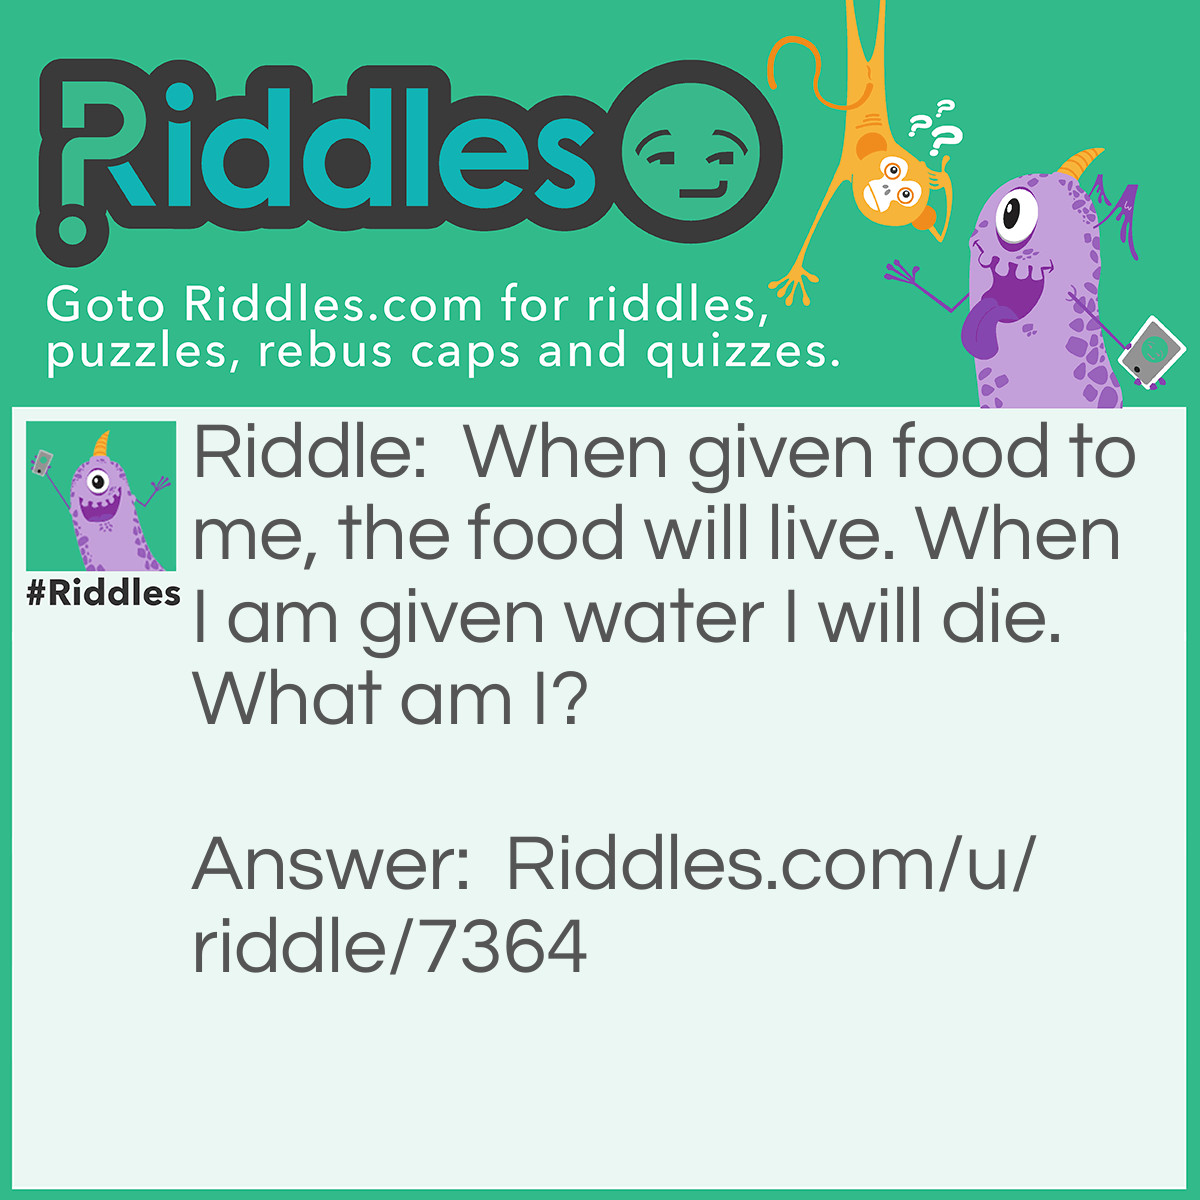 Riddle: When given food to me, the food will live. When I am given water I will die. What am I? Answer: Fire.